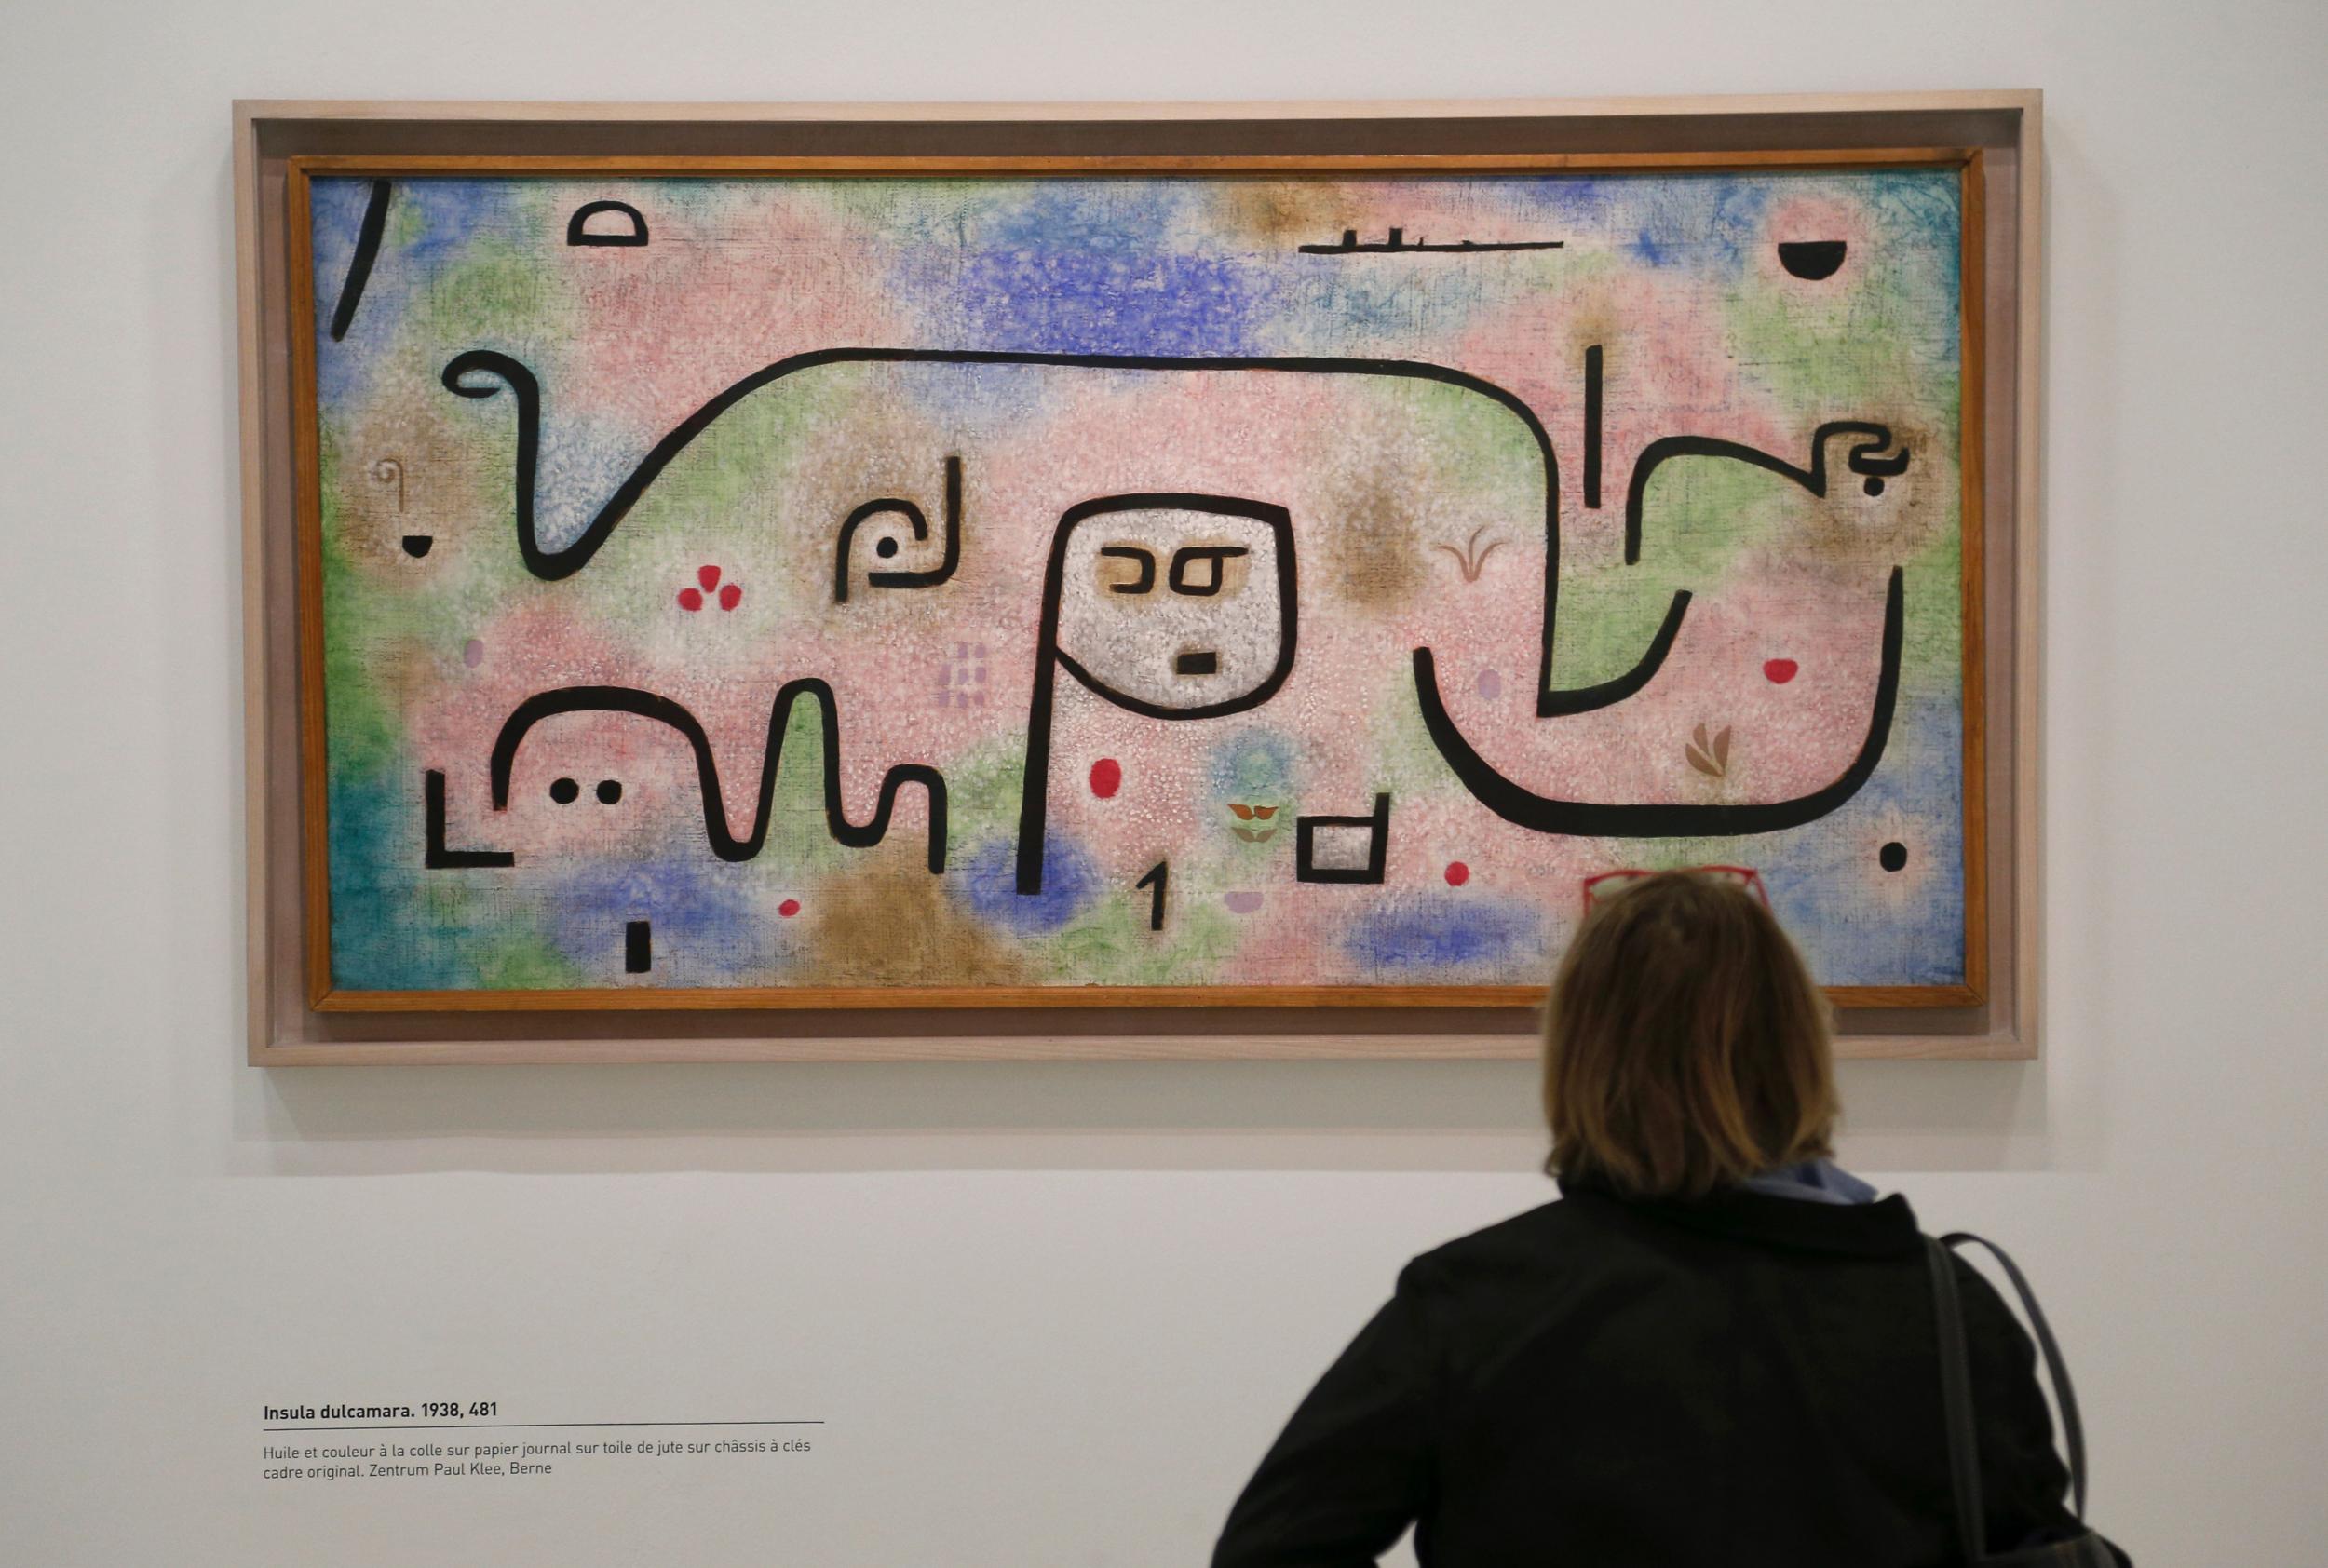 A visitor watches “Insula Dulcamara“, a 1938 mixed media painting by German artist Paul Klee (1879-1940), during the press preview at the Georges Pompidou Cultural and Art Centre on 5 April, 2016 in Paris, ahead of the Paul Klee exhibition “Paul Klee, Irony at work” presented through April 6 – August 1, 2016. (FRANCOIS GUILLOT/AFP/Getty Images)